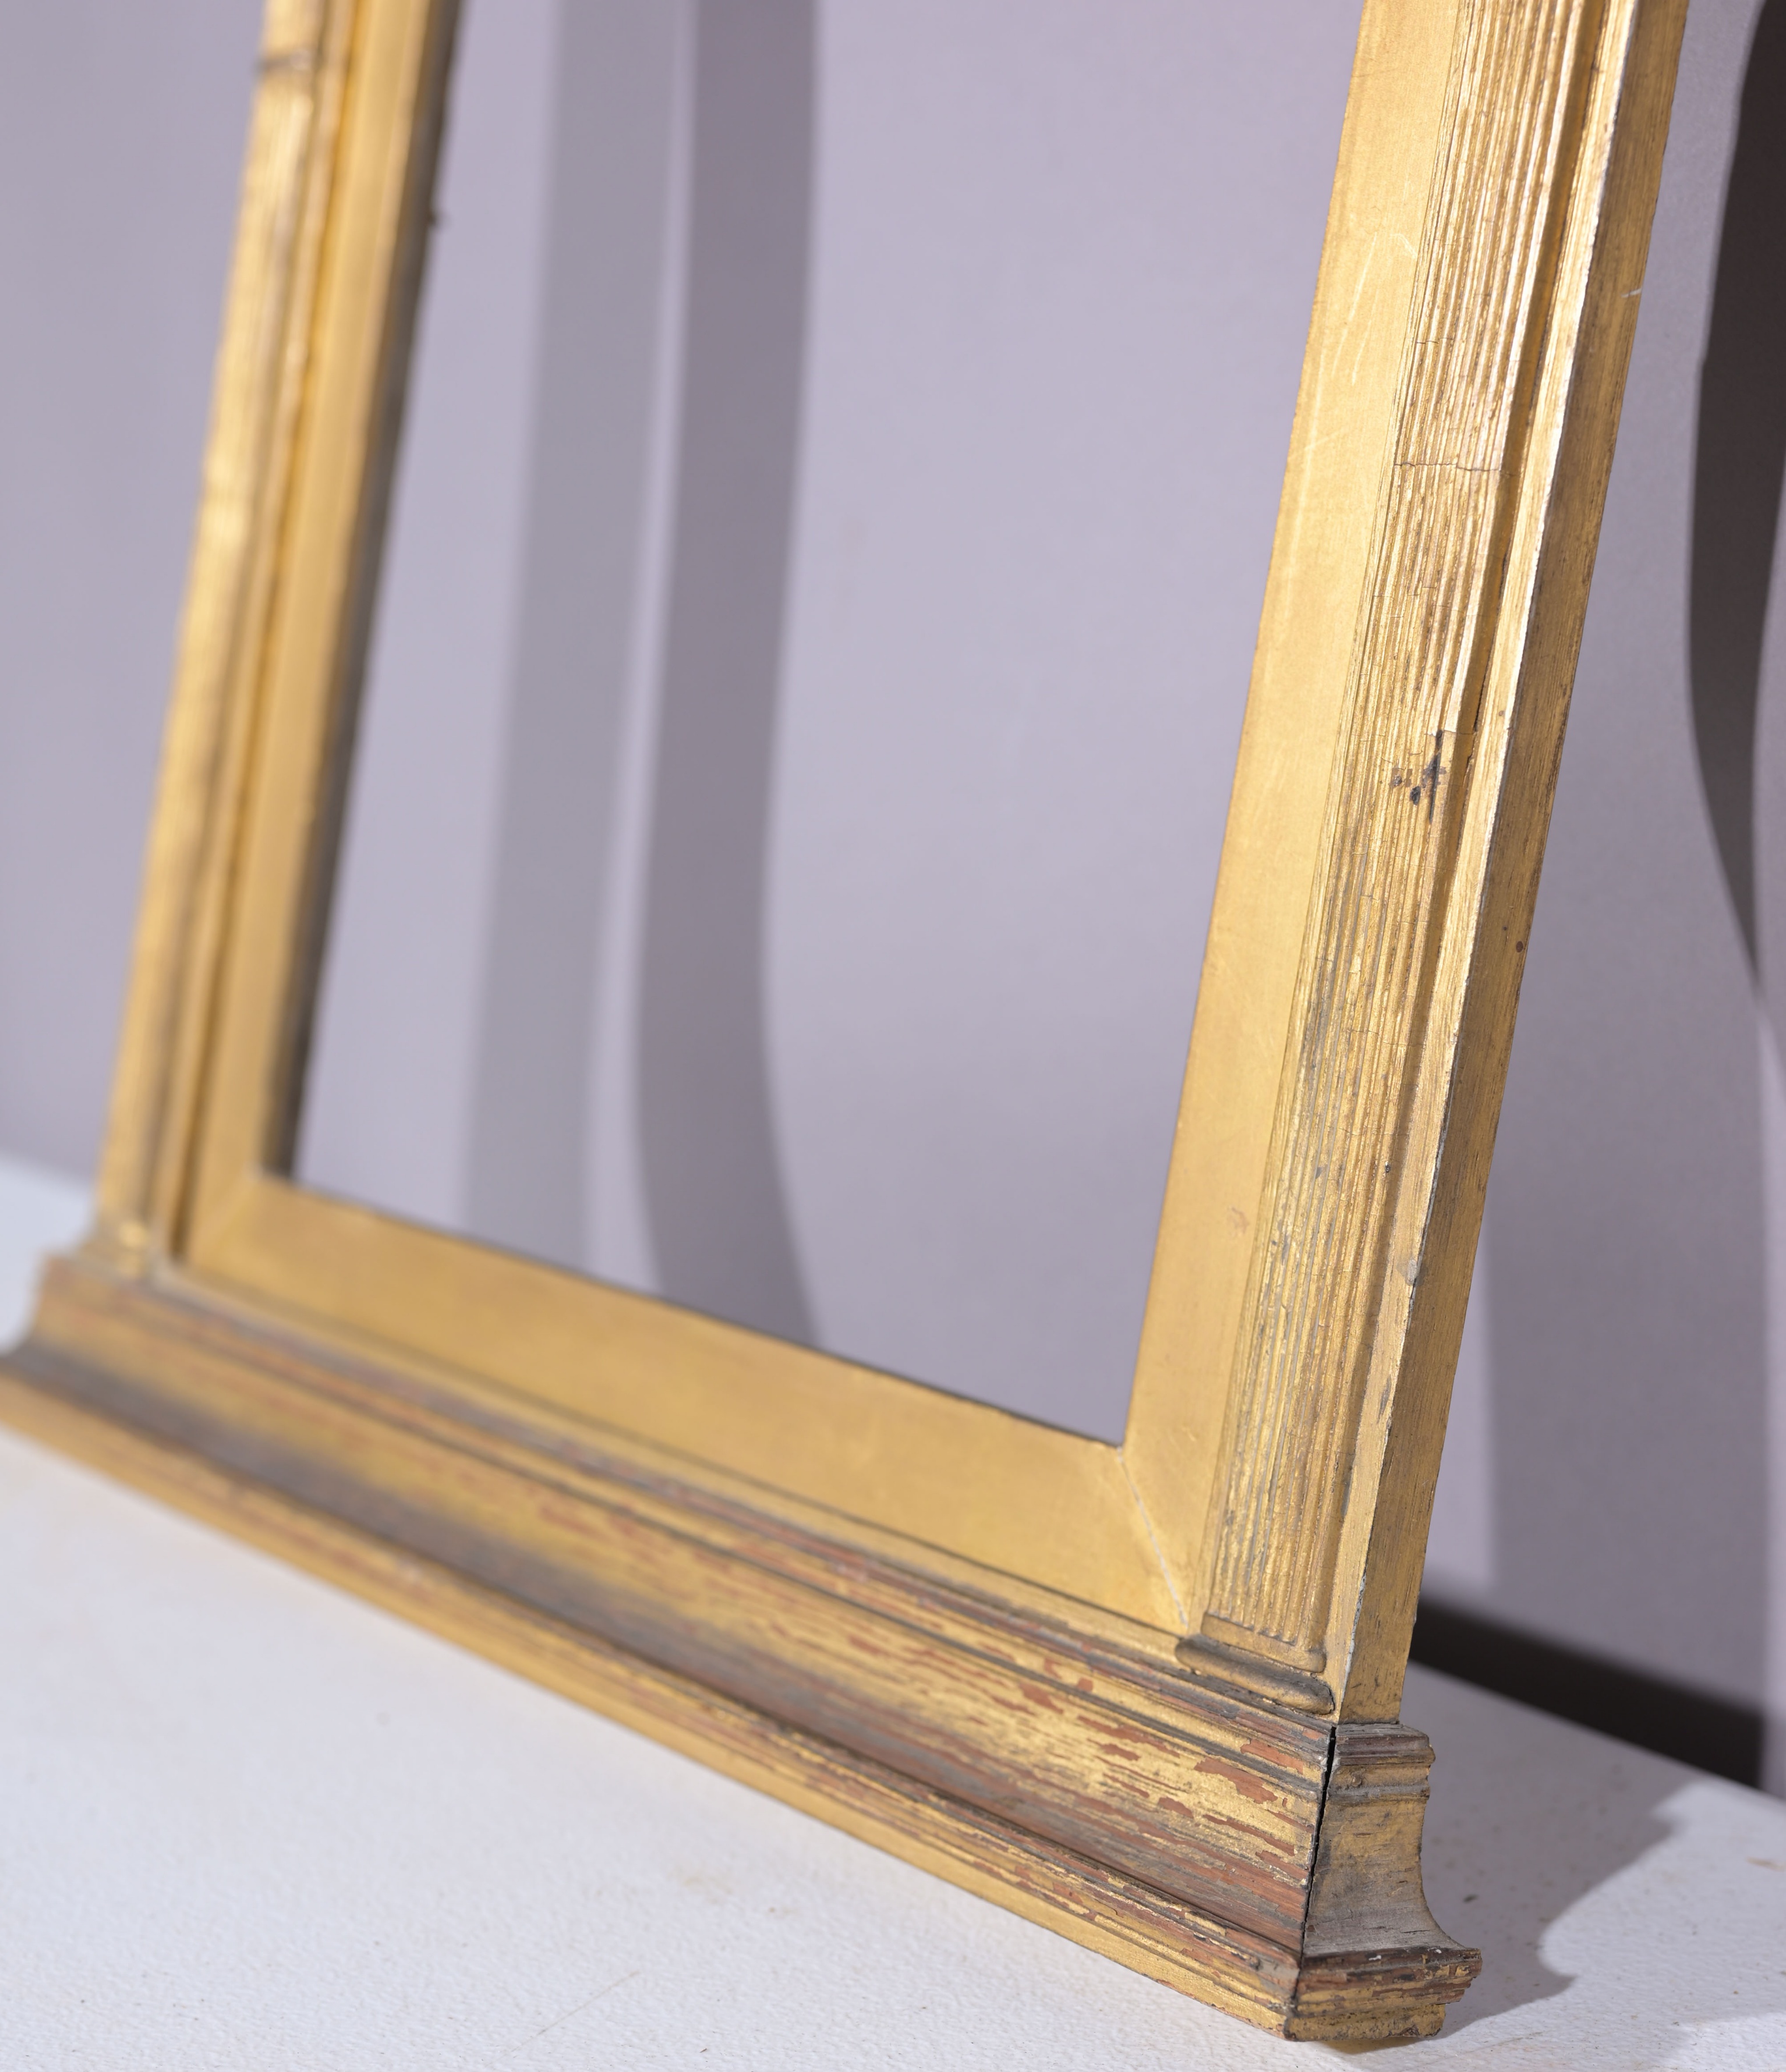 Antique Gilt Tabernacle Frame - 16.25 x 10.5 - Image 5 of 6